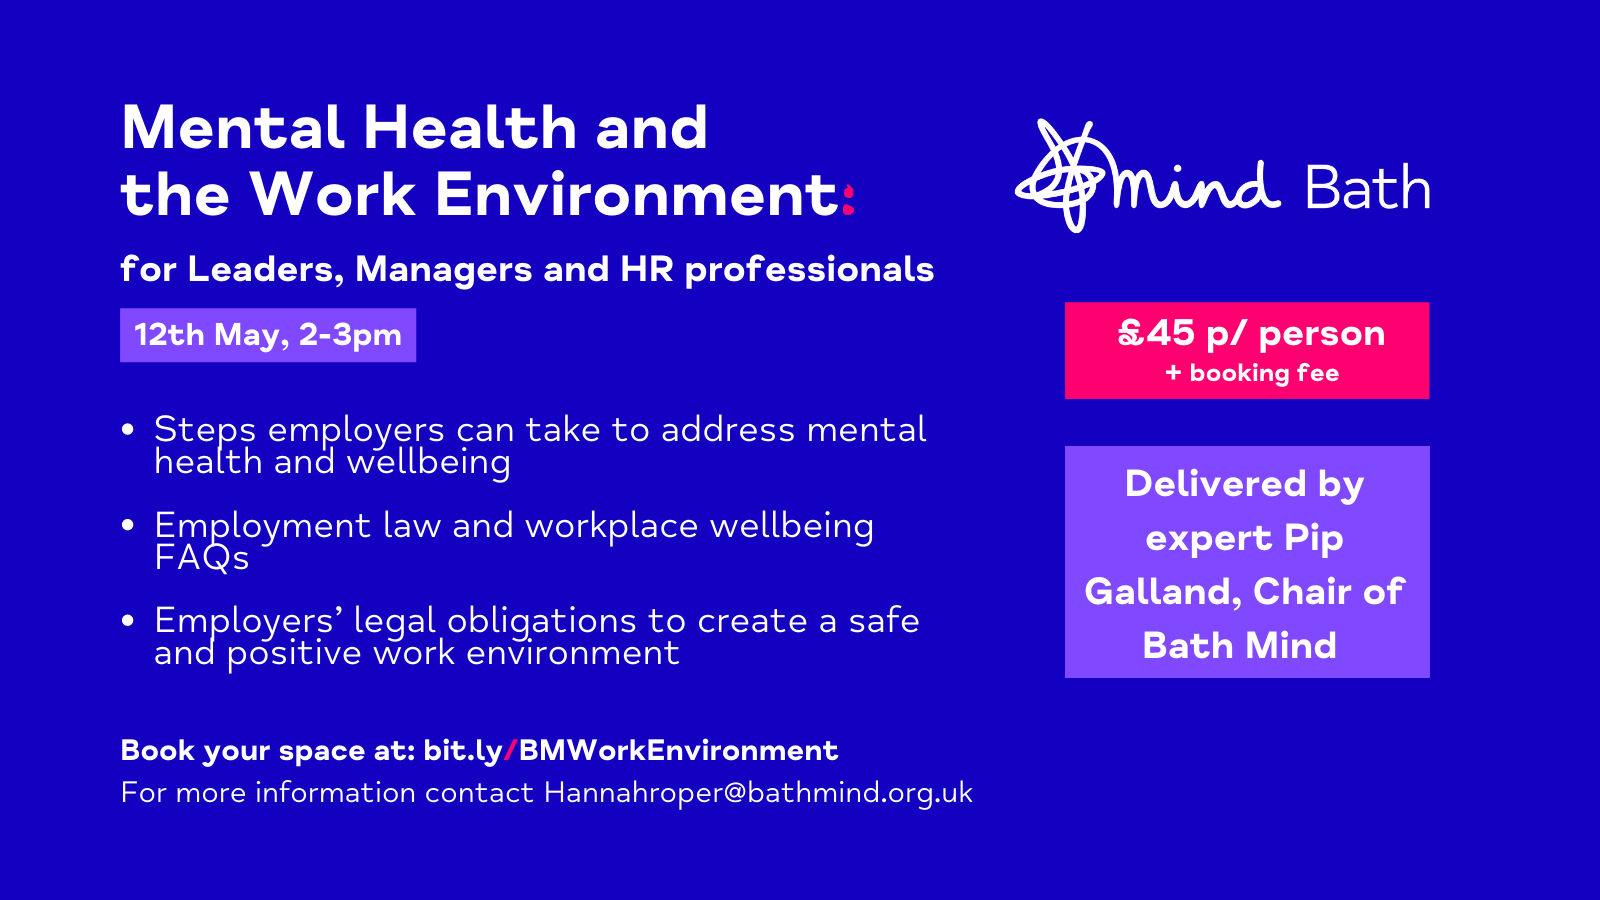 Mental Health and the Work Environment Event